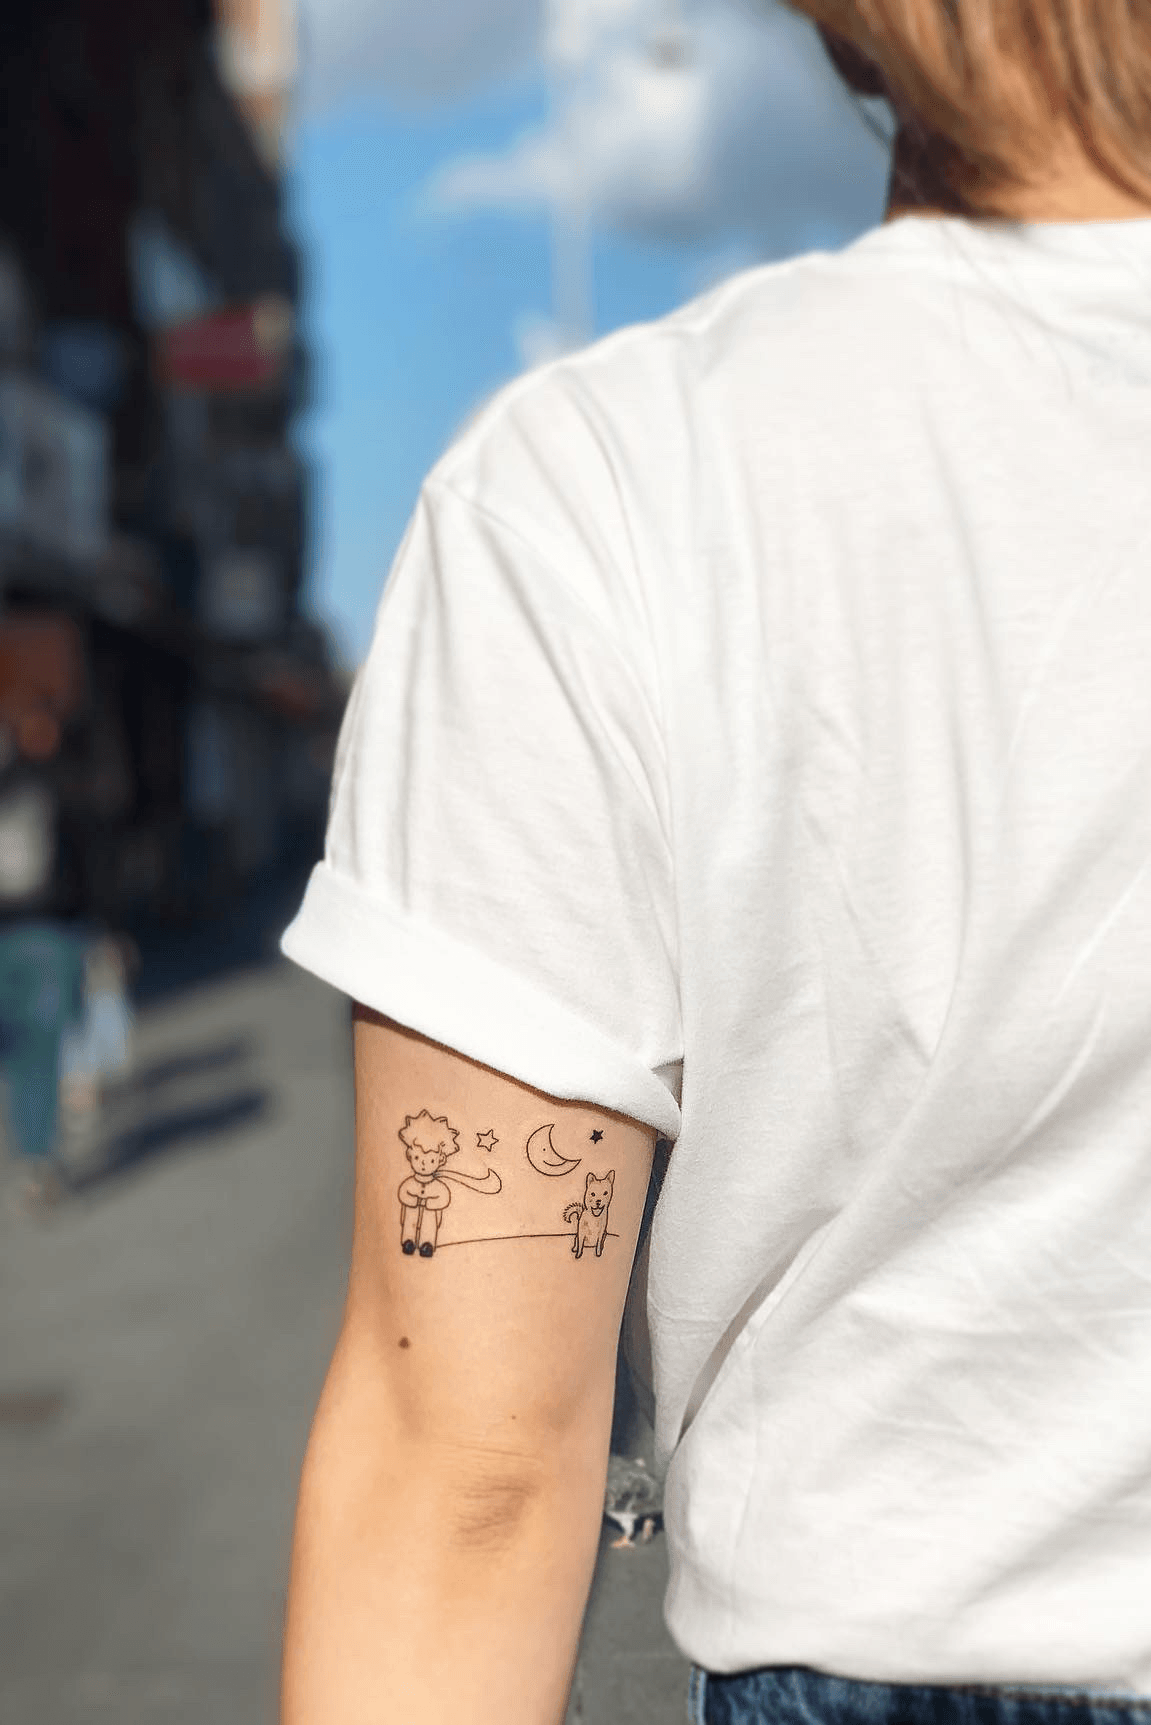 35 Back Arm Tattoos which will make you look unique